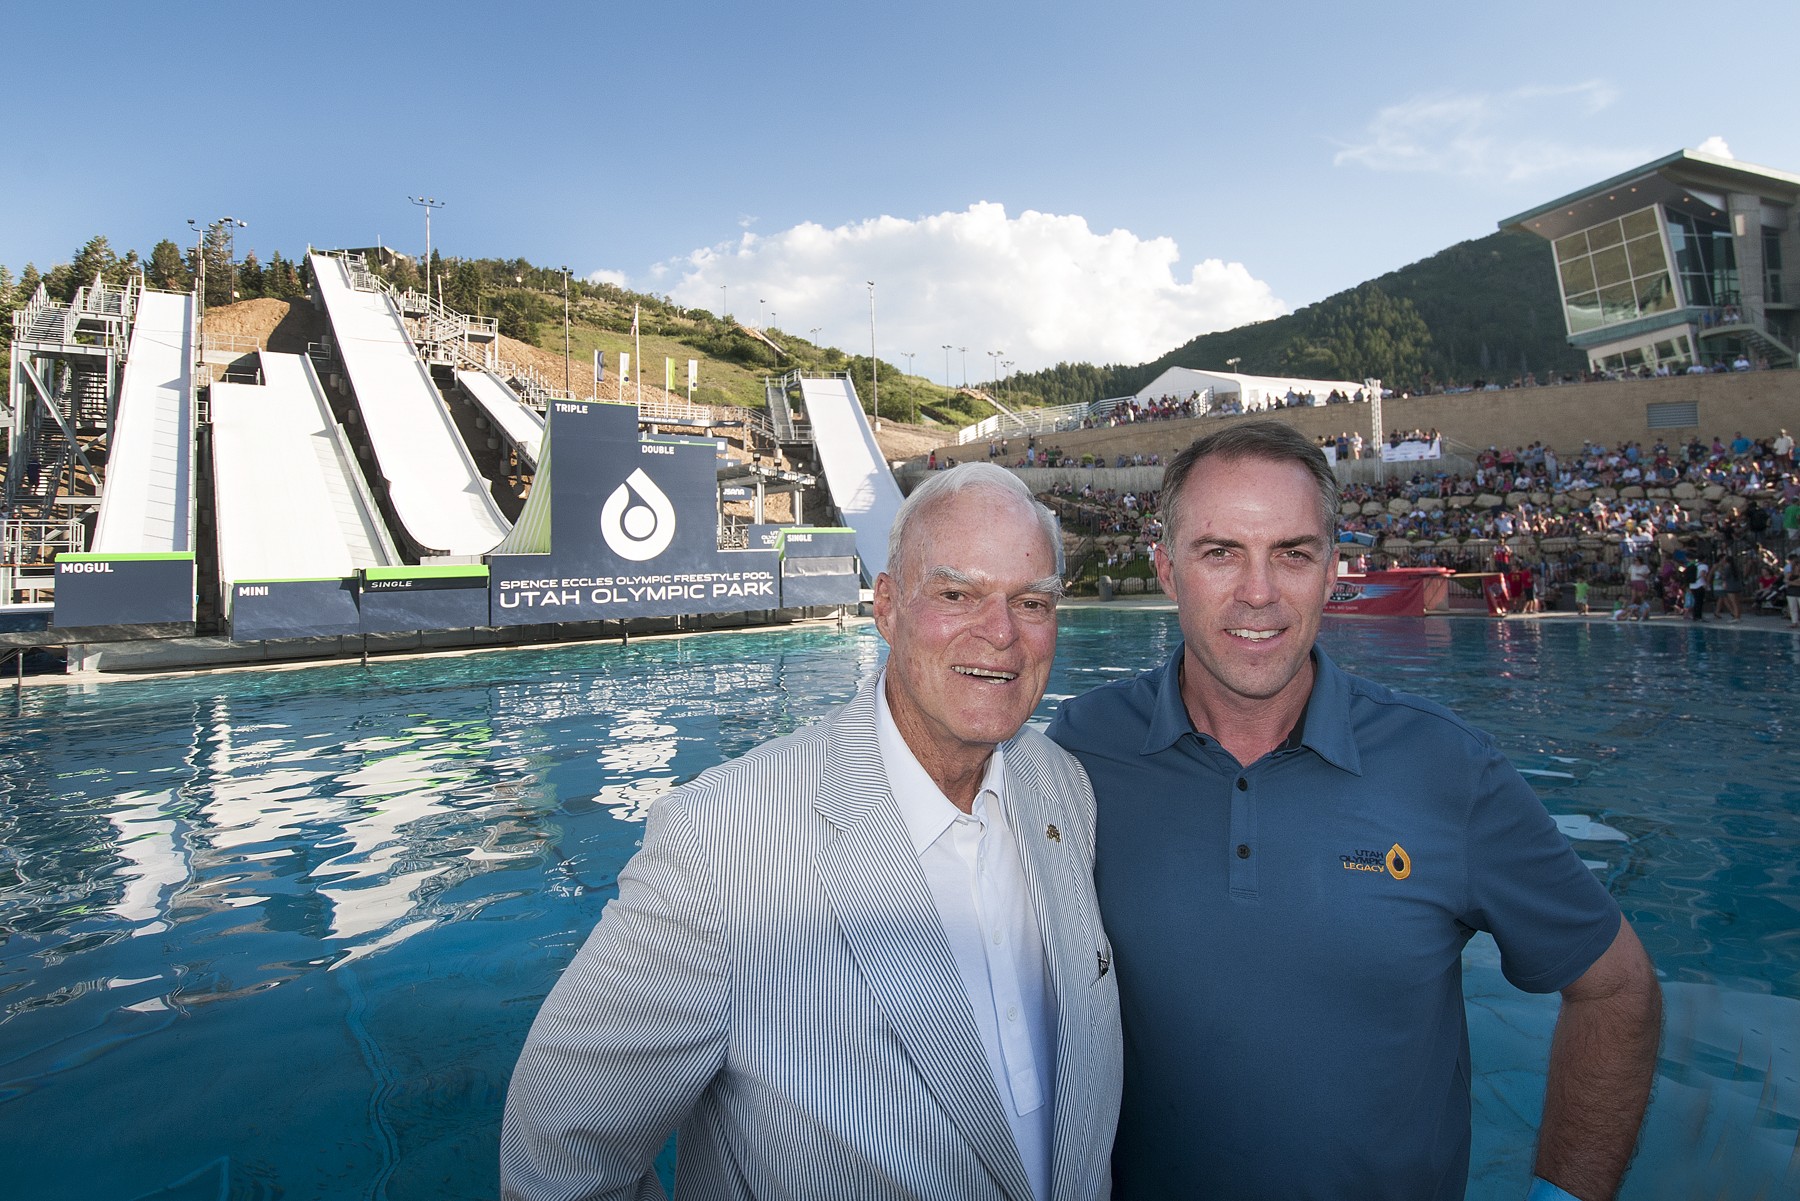 Spence Eccles and Colin Hlton celebrate the grand opening of the new Spence Eccles Olympic Freestyle Pool at the Utah Olympic Park. (Tom Kelly/USSA)